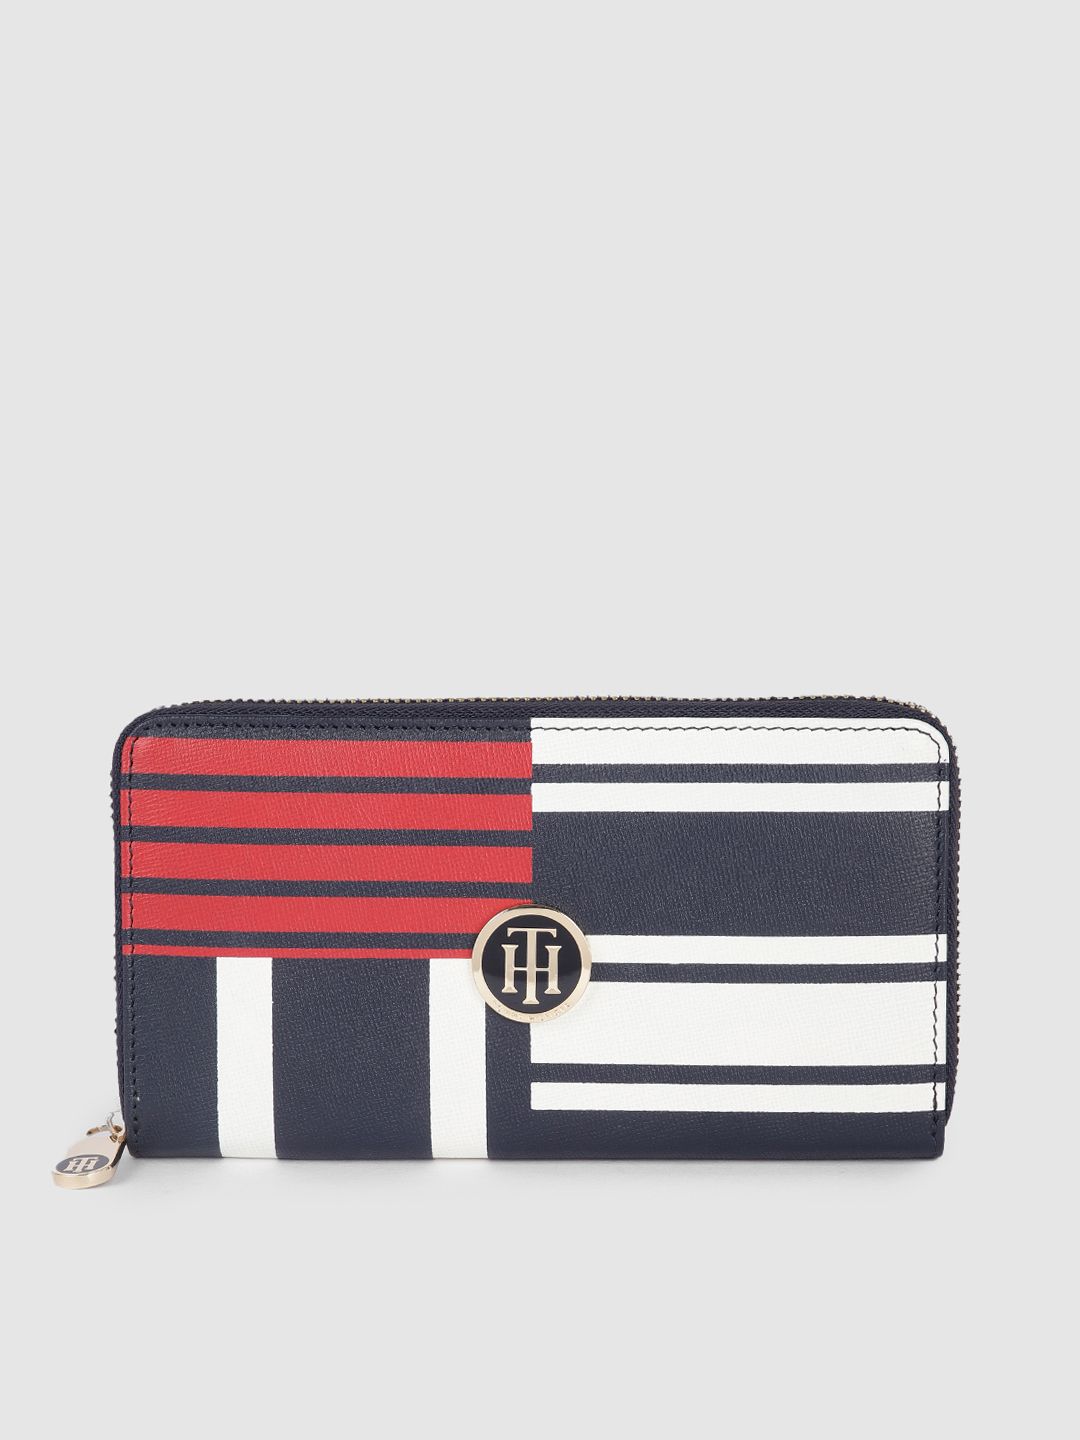 Tommy Hilfiger Women Navy Blue & White Printed Leather Zip Around Wallet Price in India